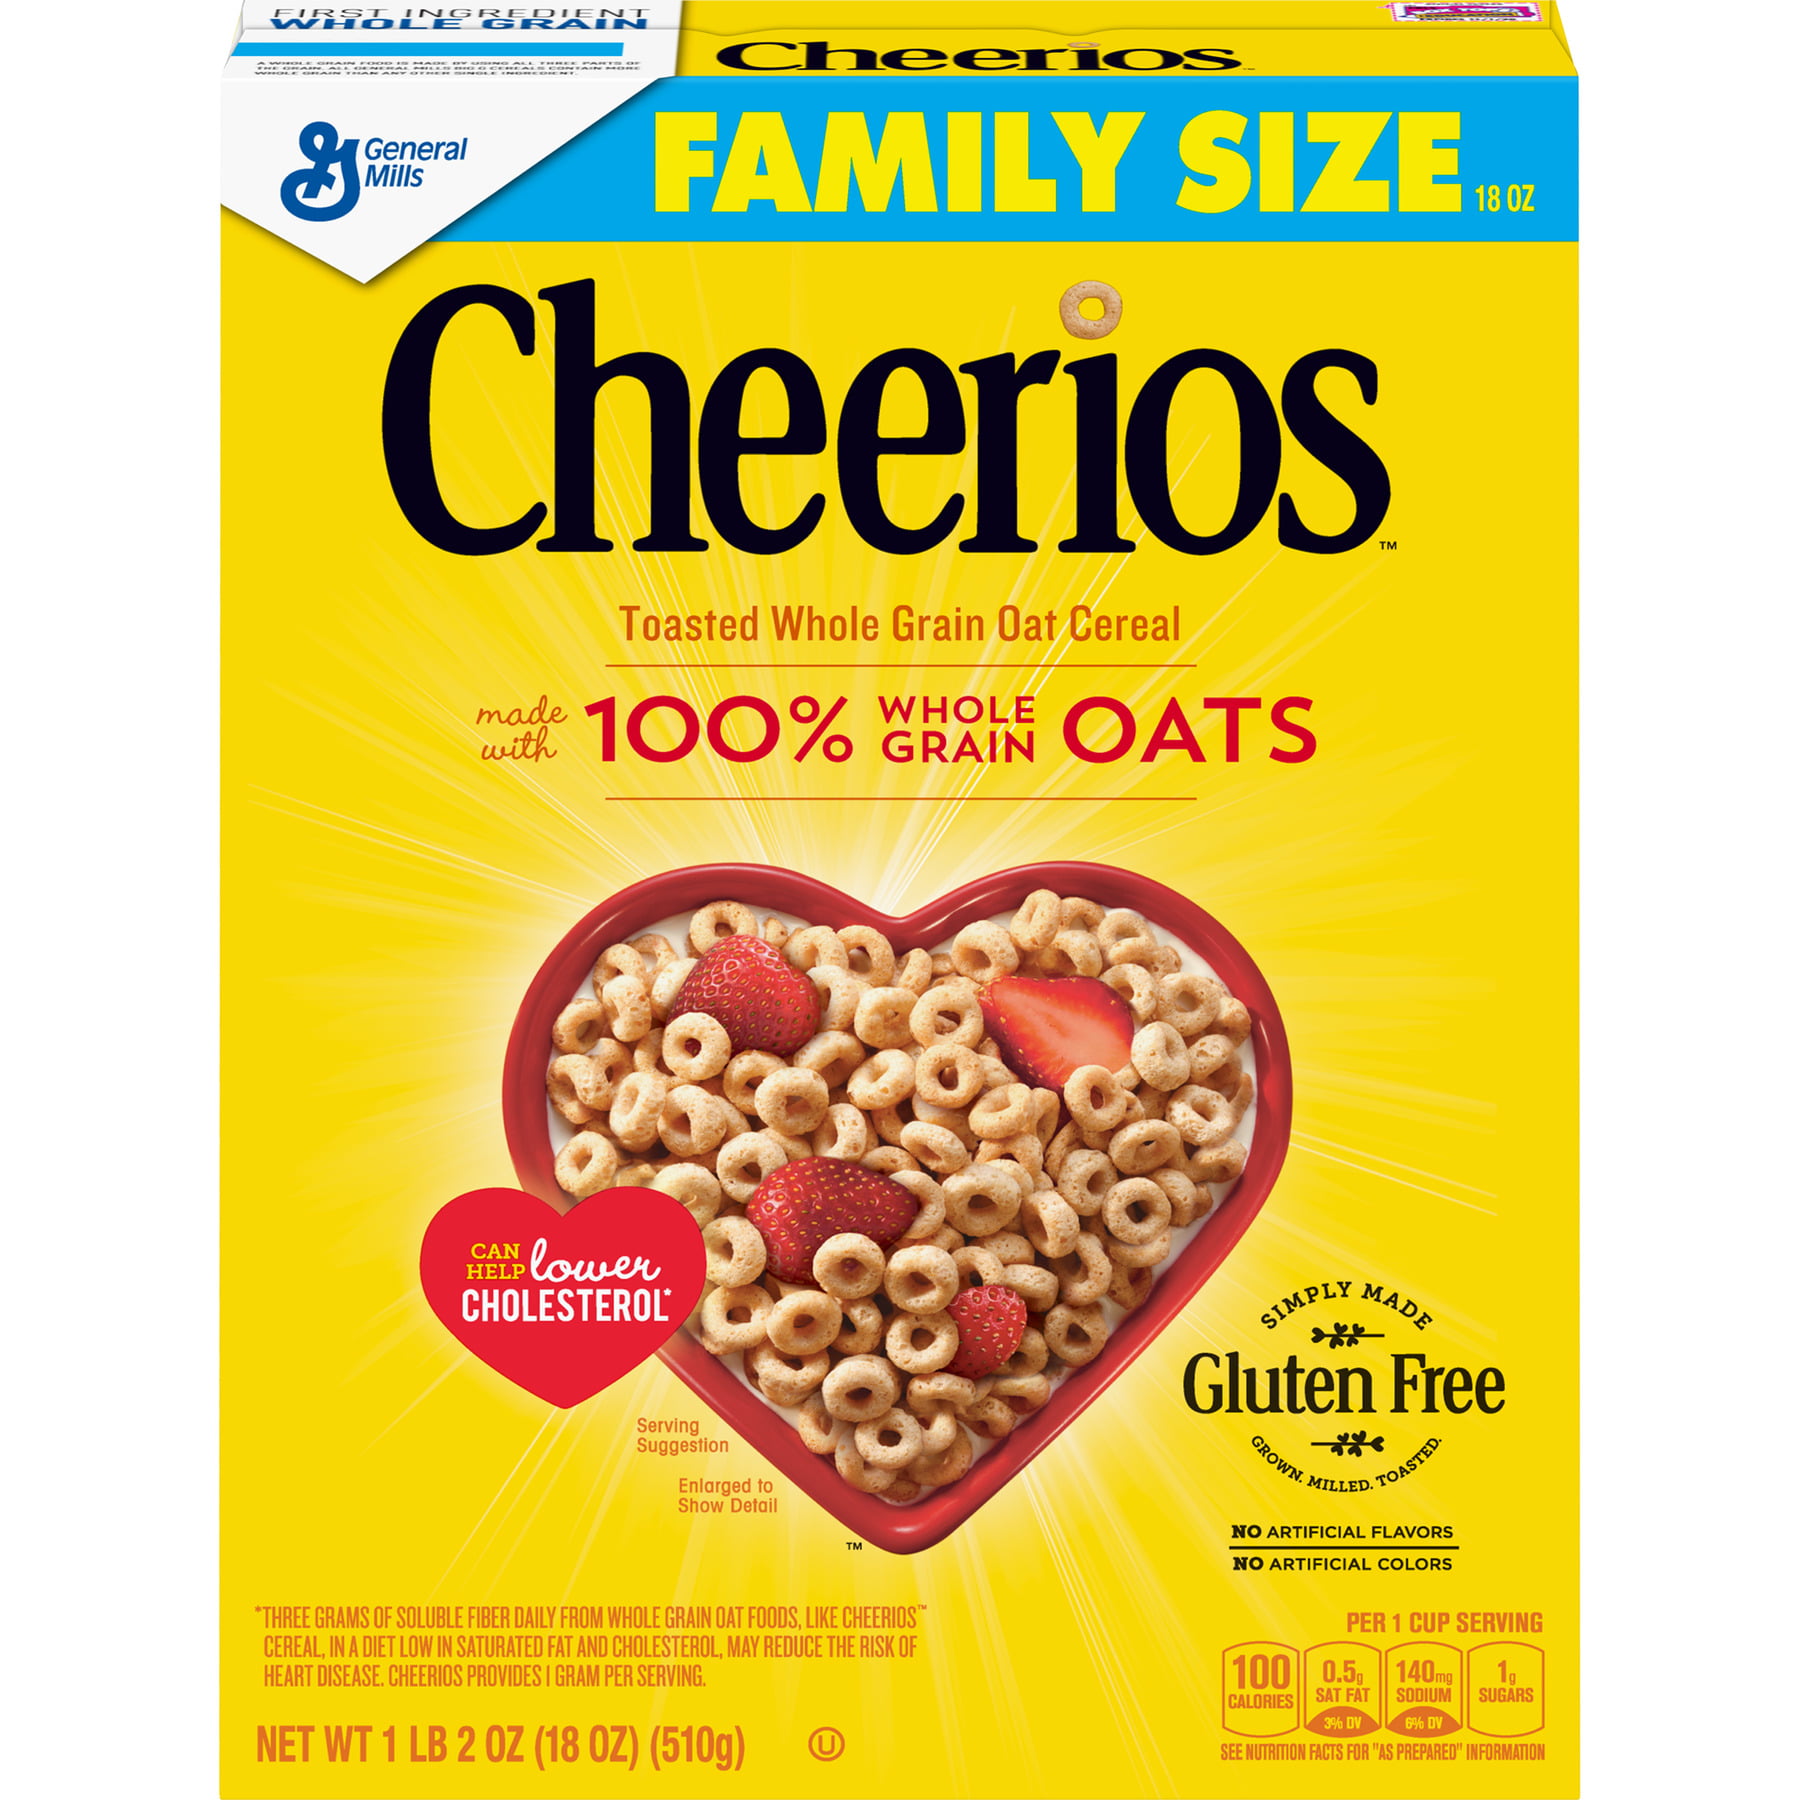 cheerios, gluten free, cereal with whole grain oats, 18 oz box